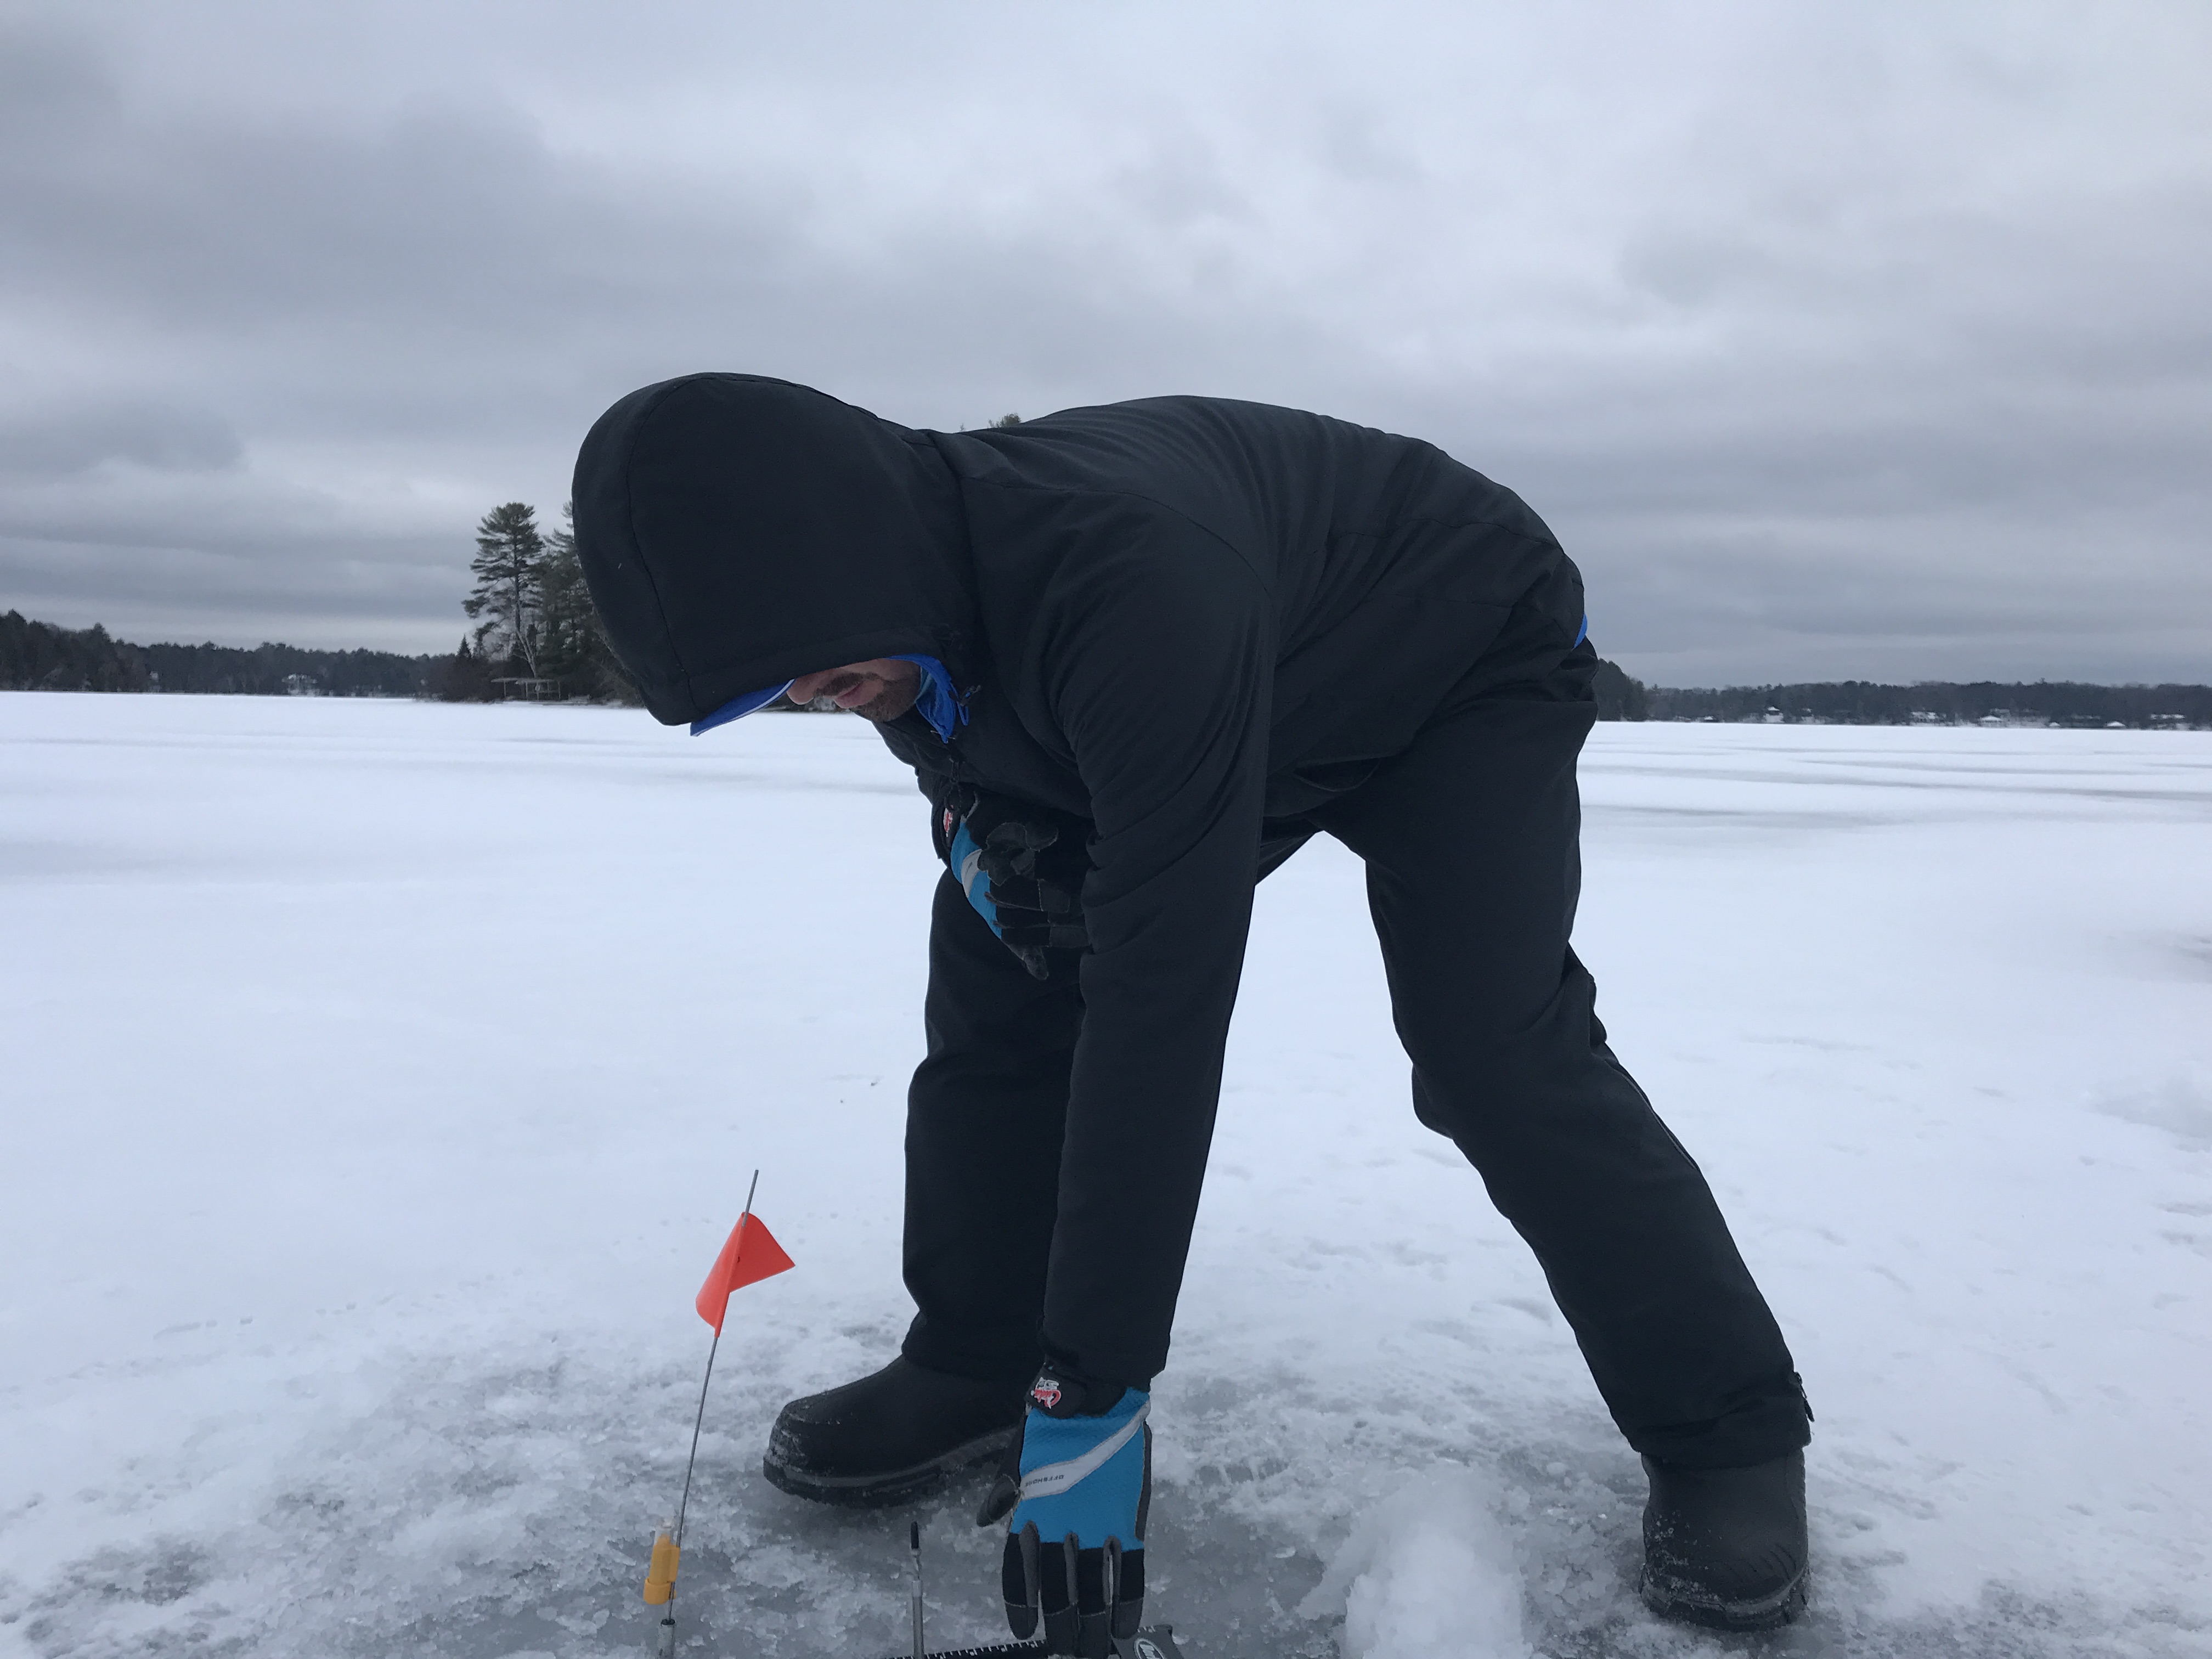 https://www.outdoorsfirst.com/icefishing/wp-content/uploads/sites/7/2019/03/IMG_1461.jpg